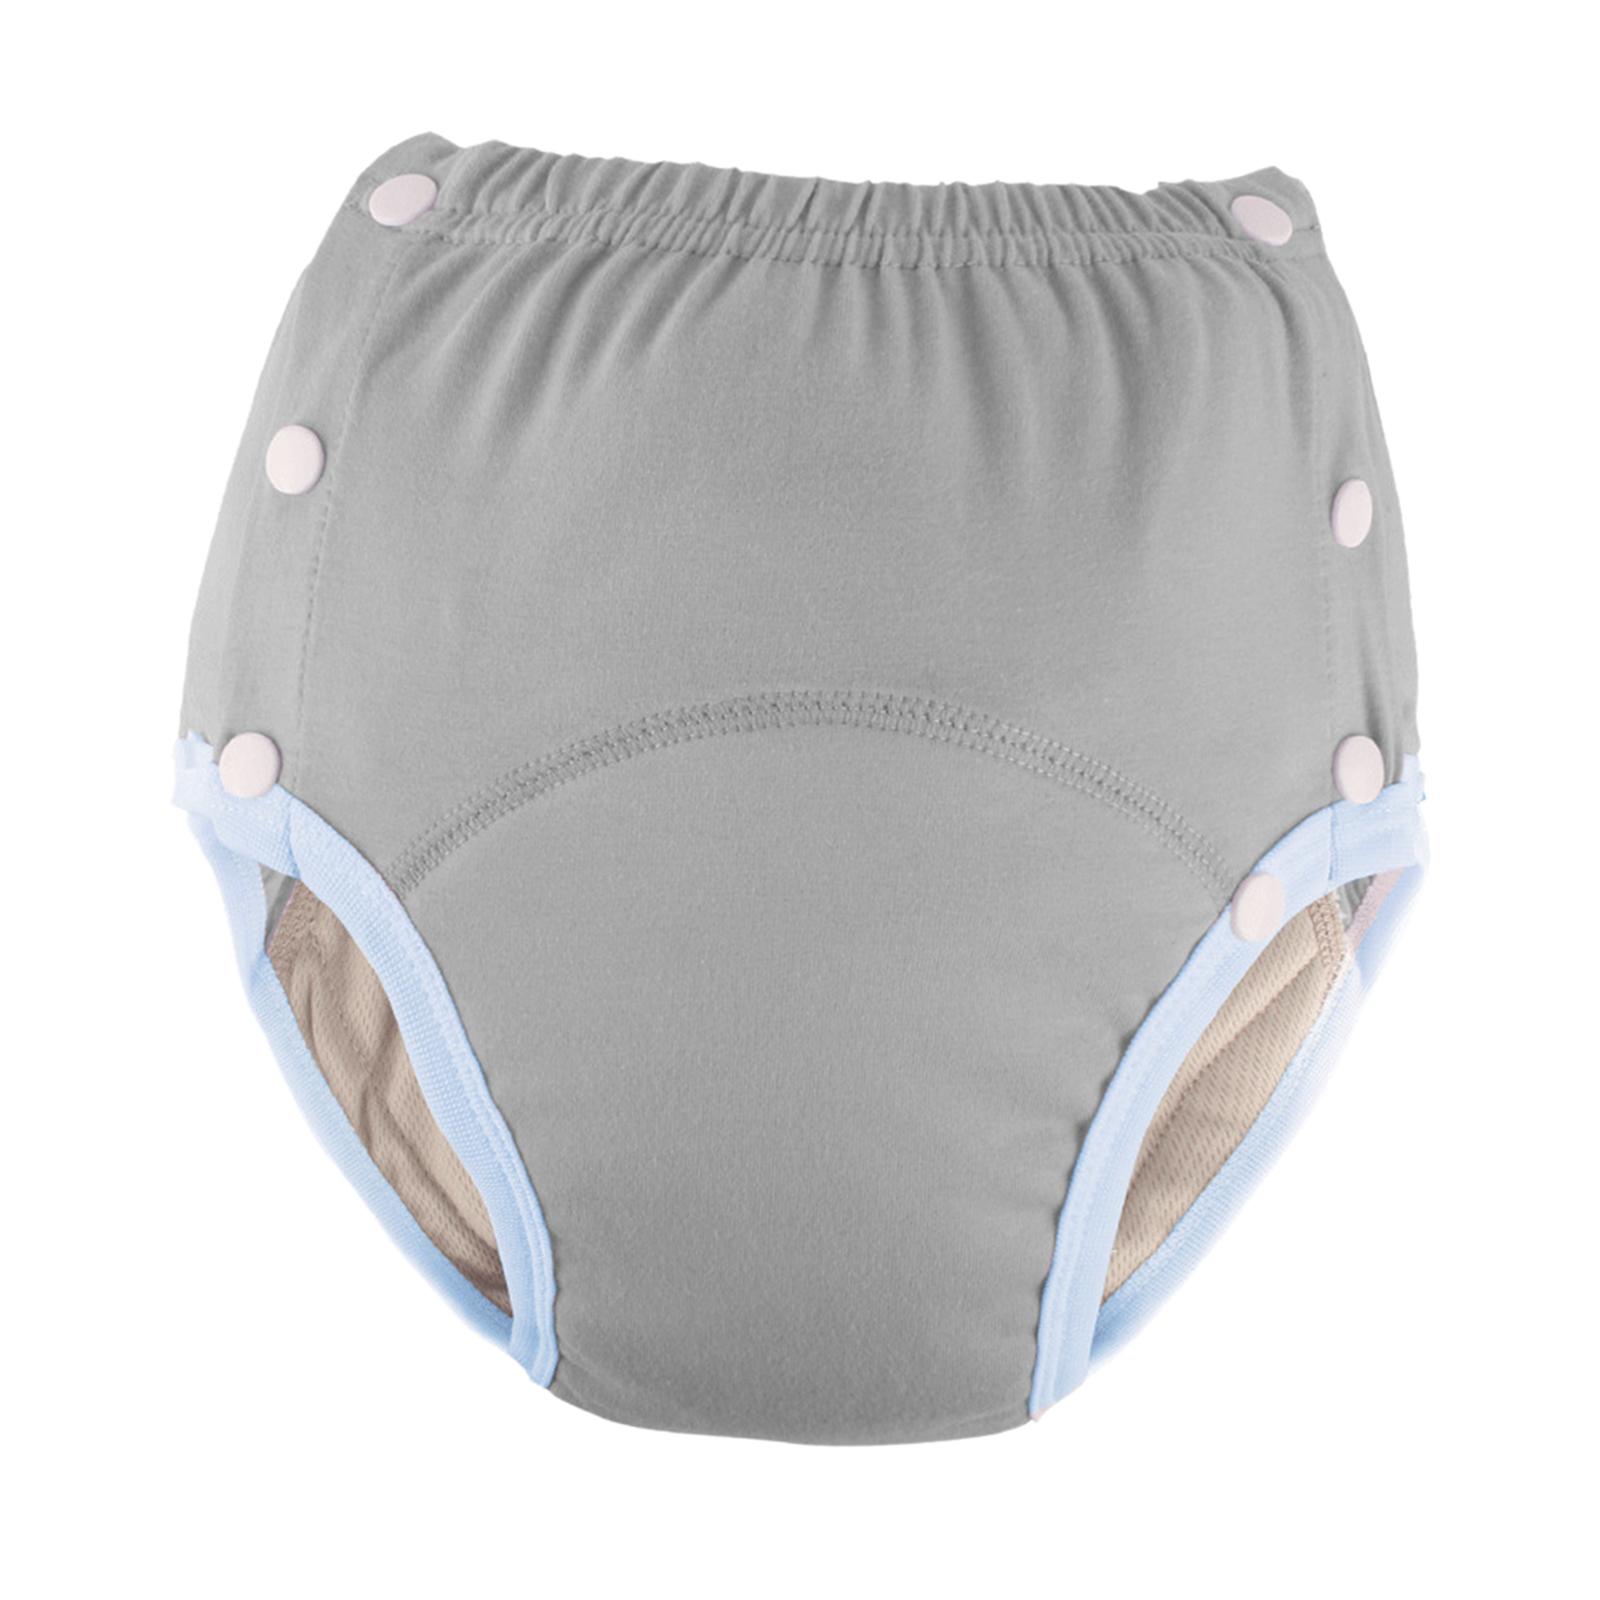 hurtownia pieluch pampers 1